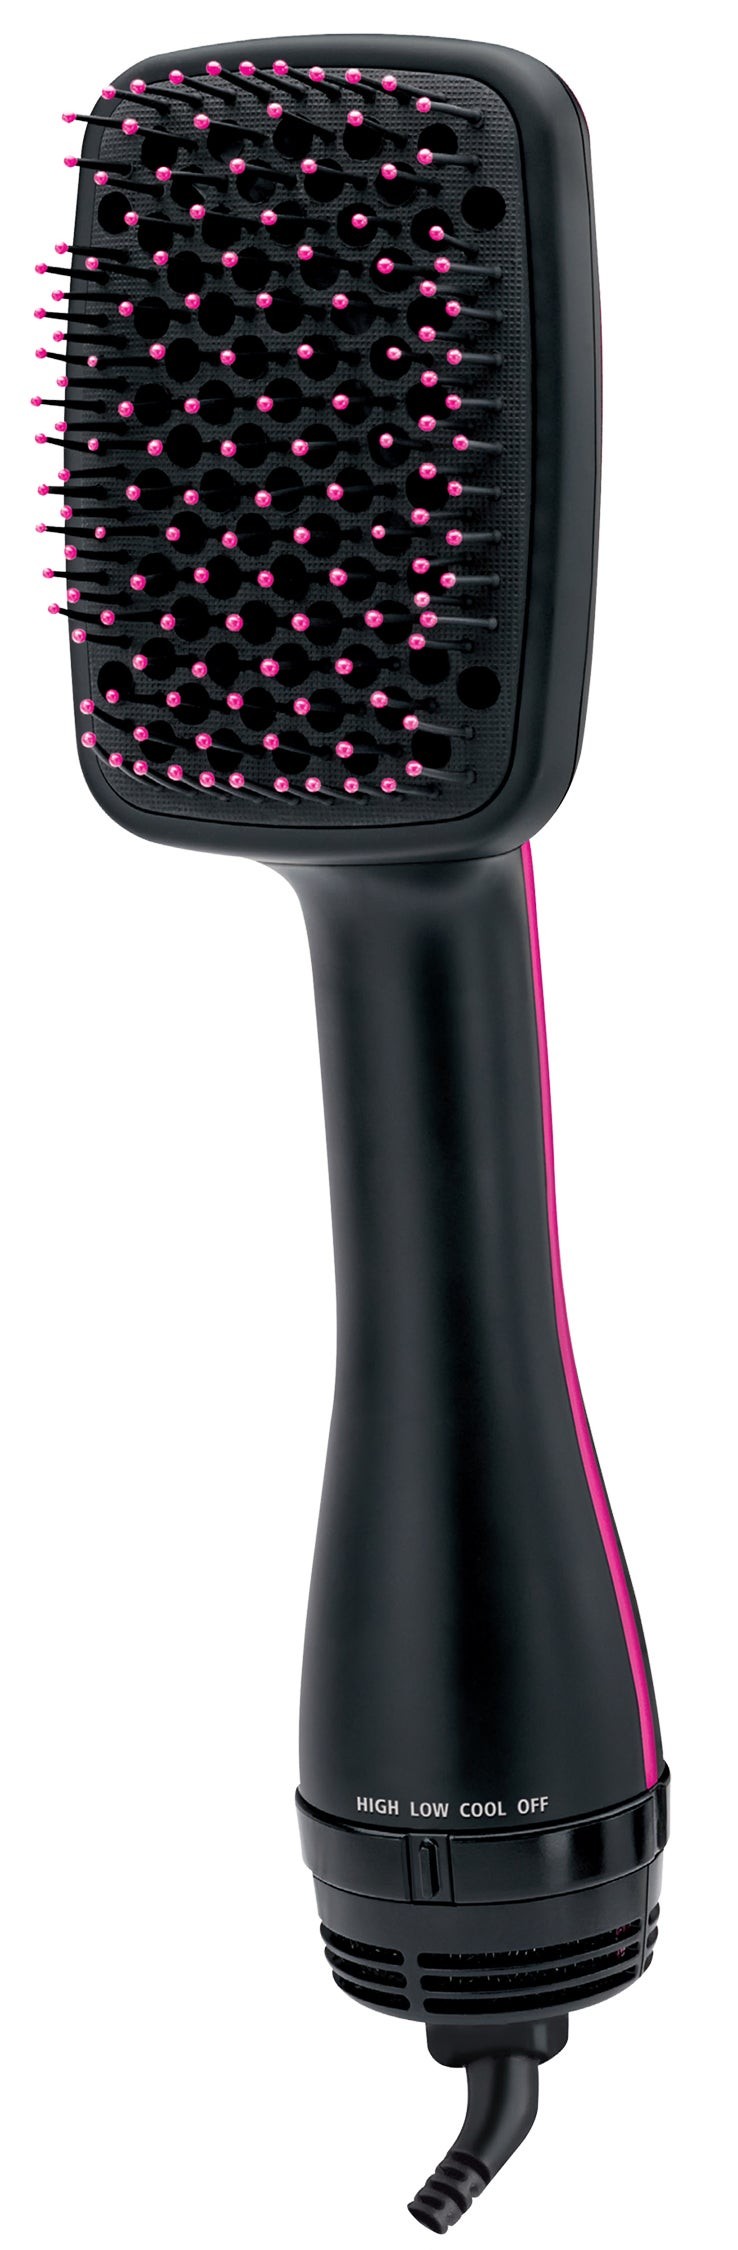 2-in-1 Hair Dryer And Styler